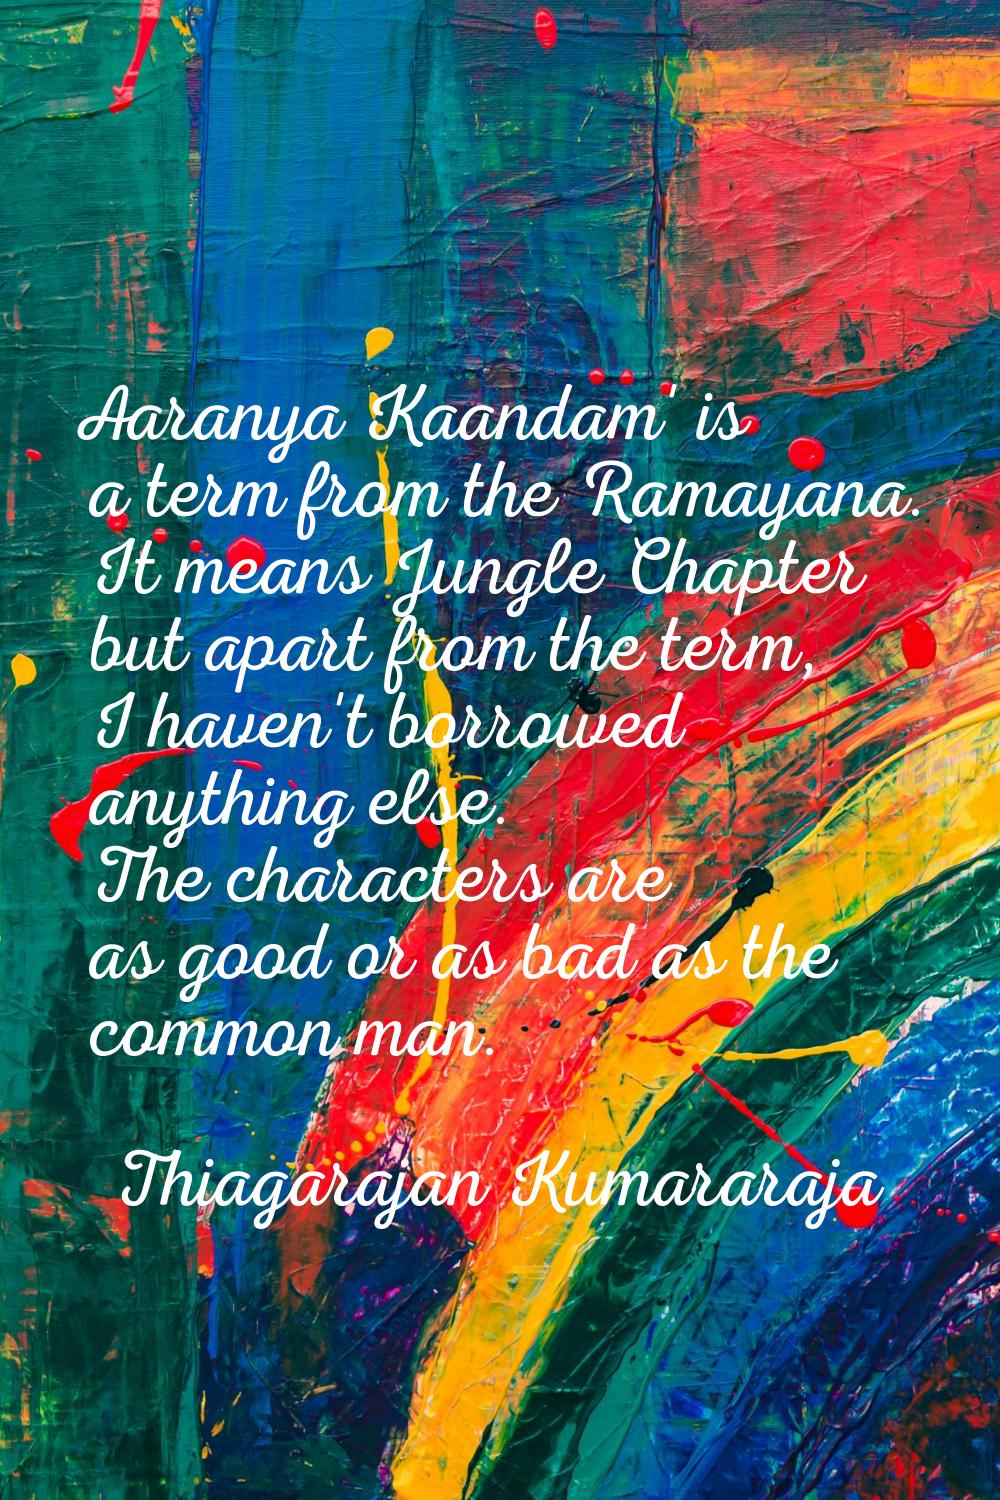 Aaranya Kaandam' is a term from the Ramayana. It means Jungle Chapter but apart from the term, I ha